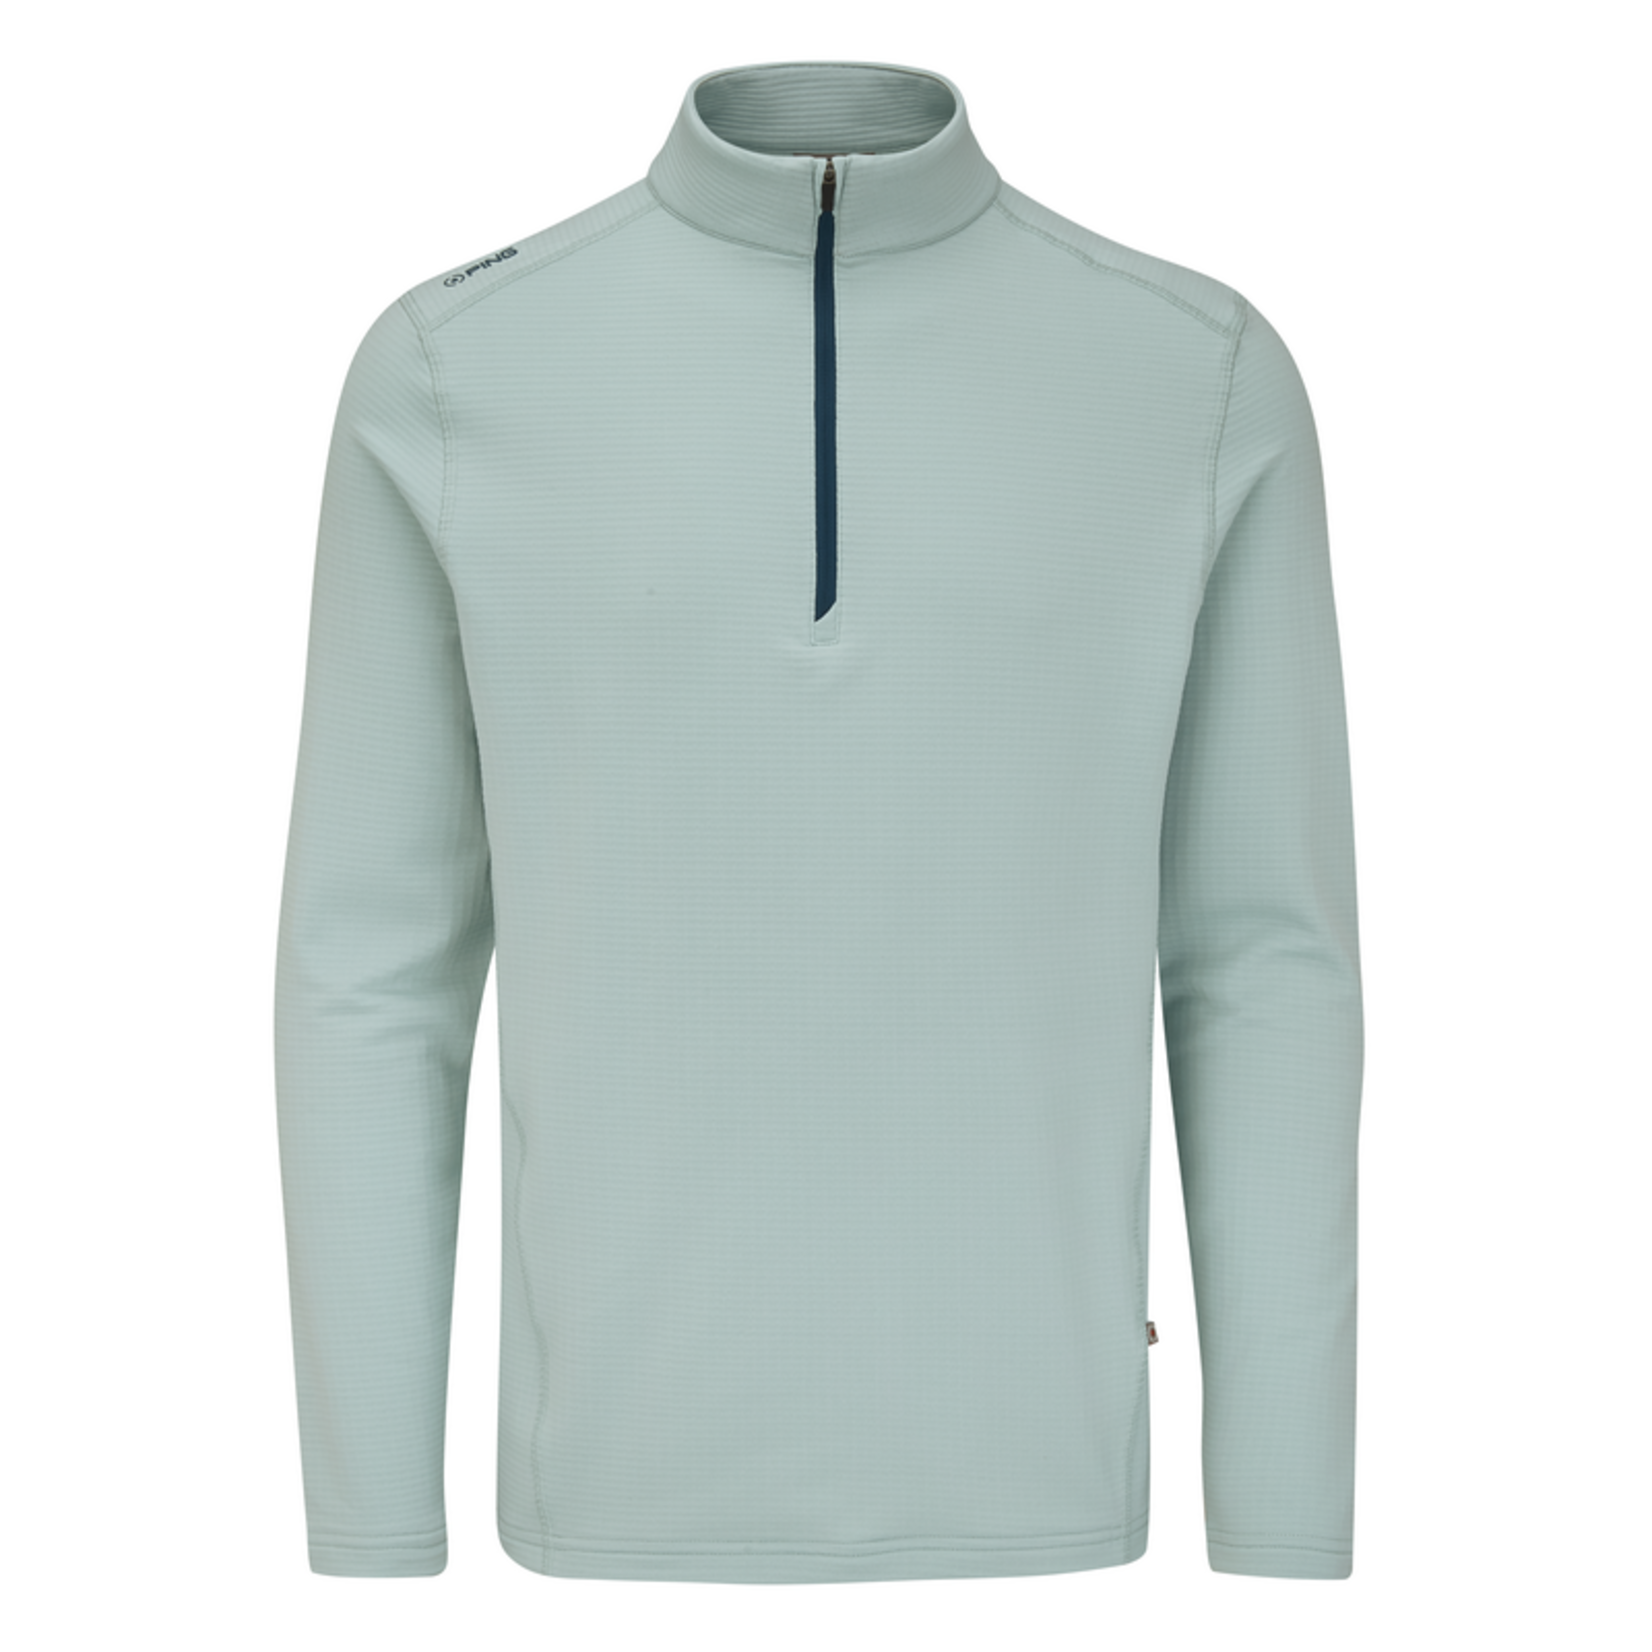 Ping PING Edwin Midlayer - Harbour Grey